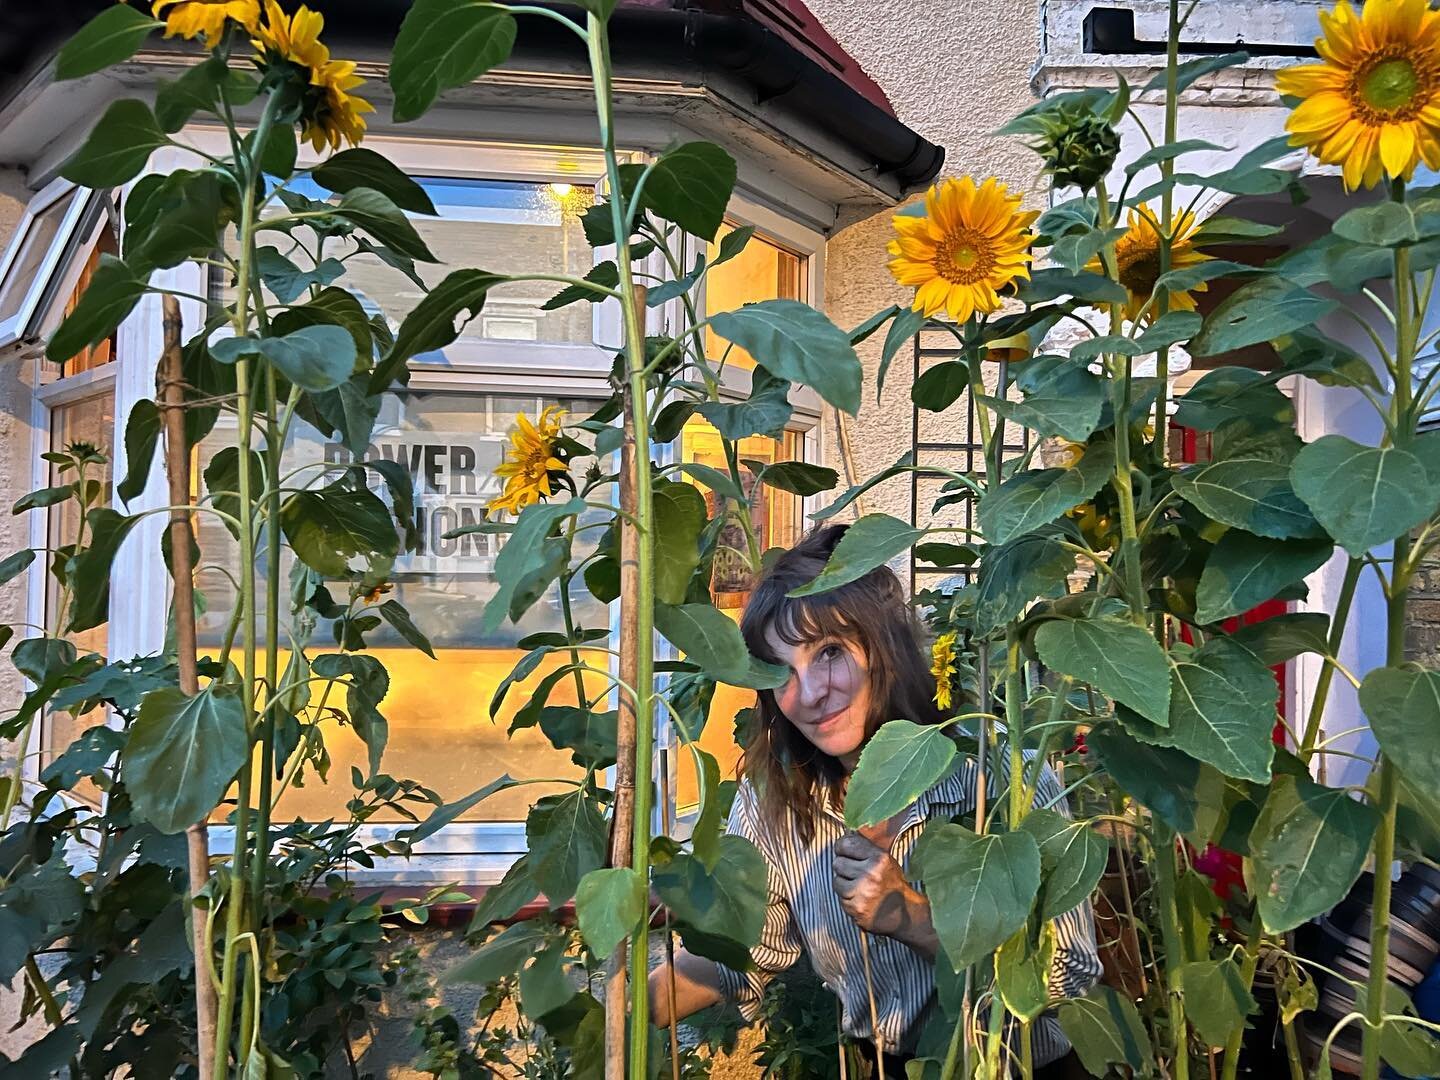 Hilary among the sunflowers last night around 9pm, the light was fading fast and the yellows were so vibrant.